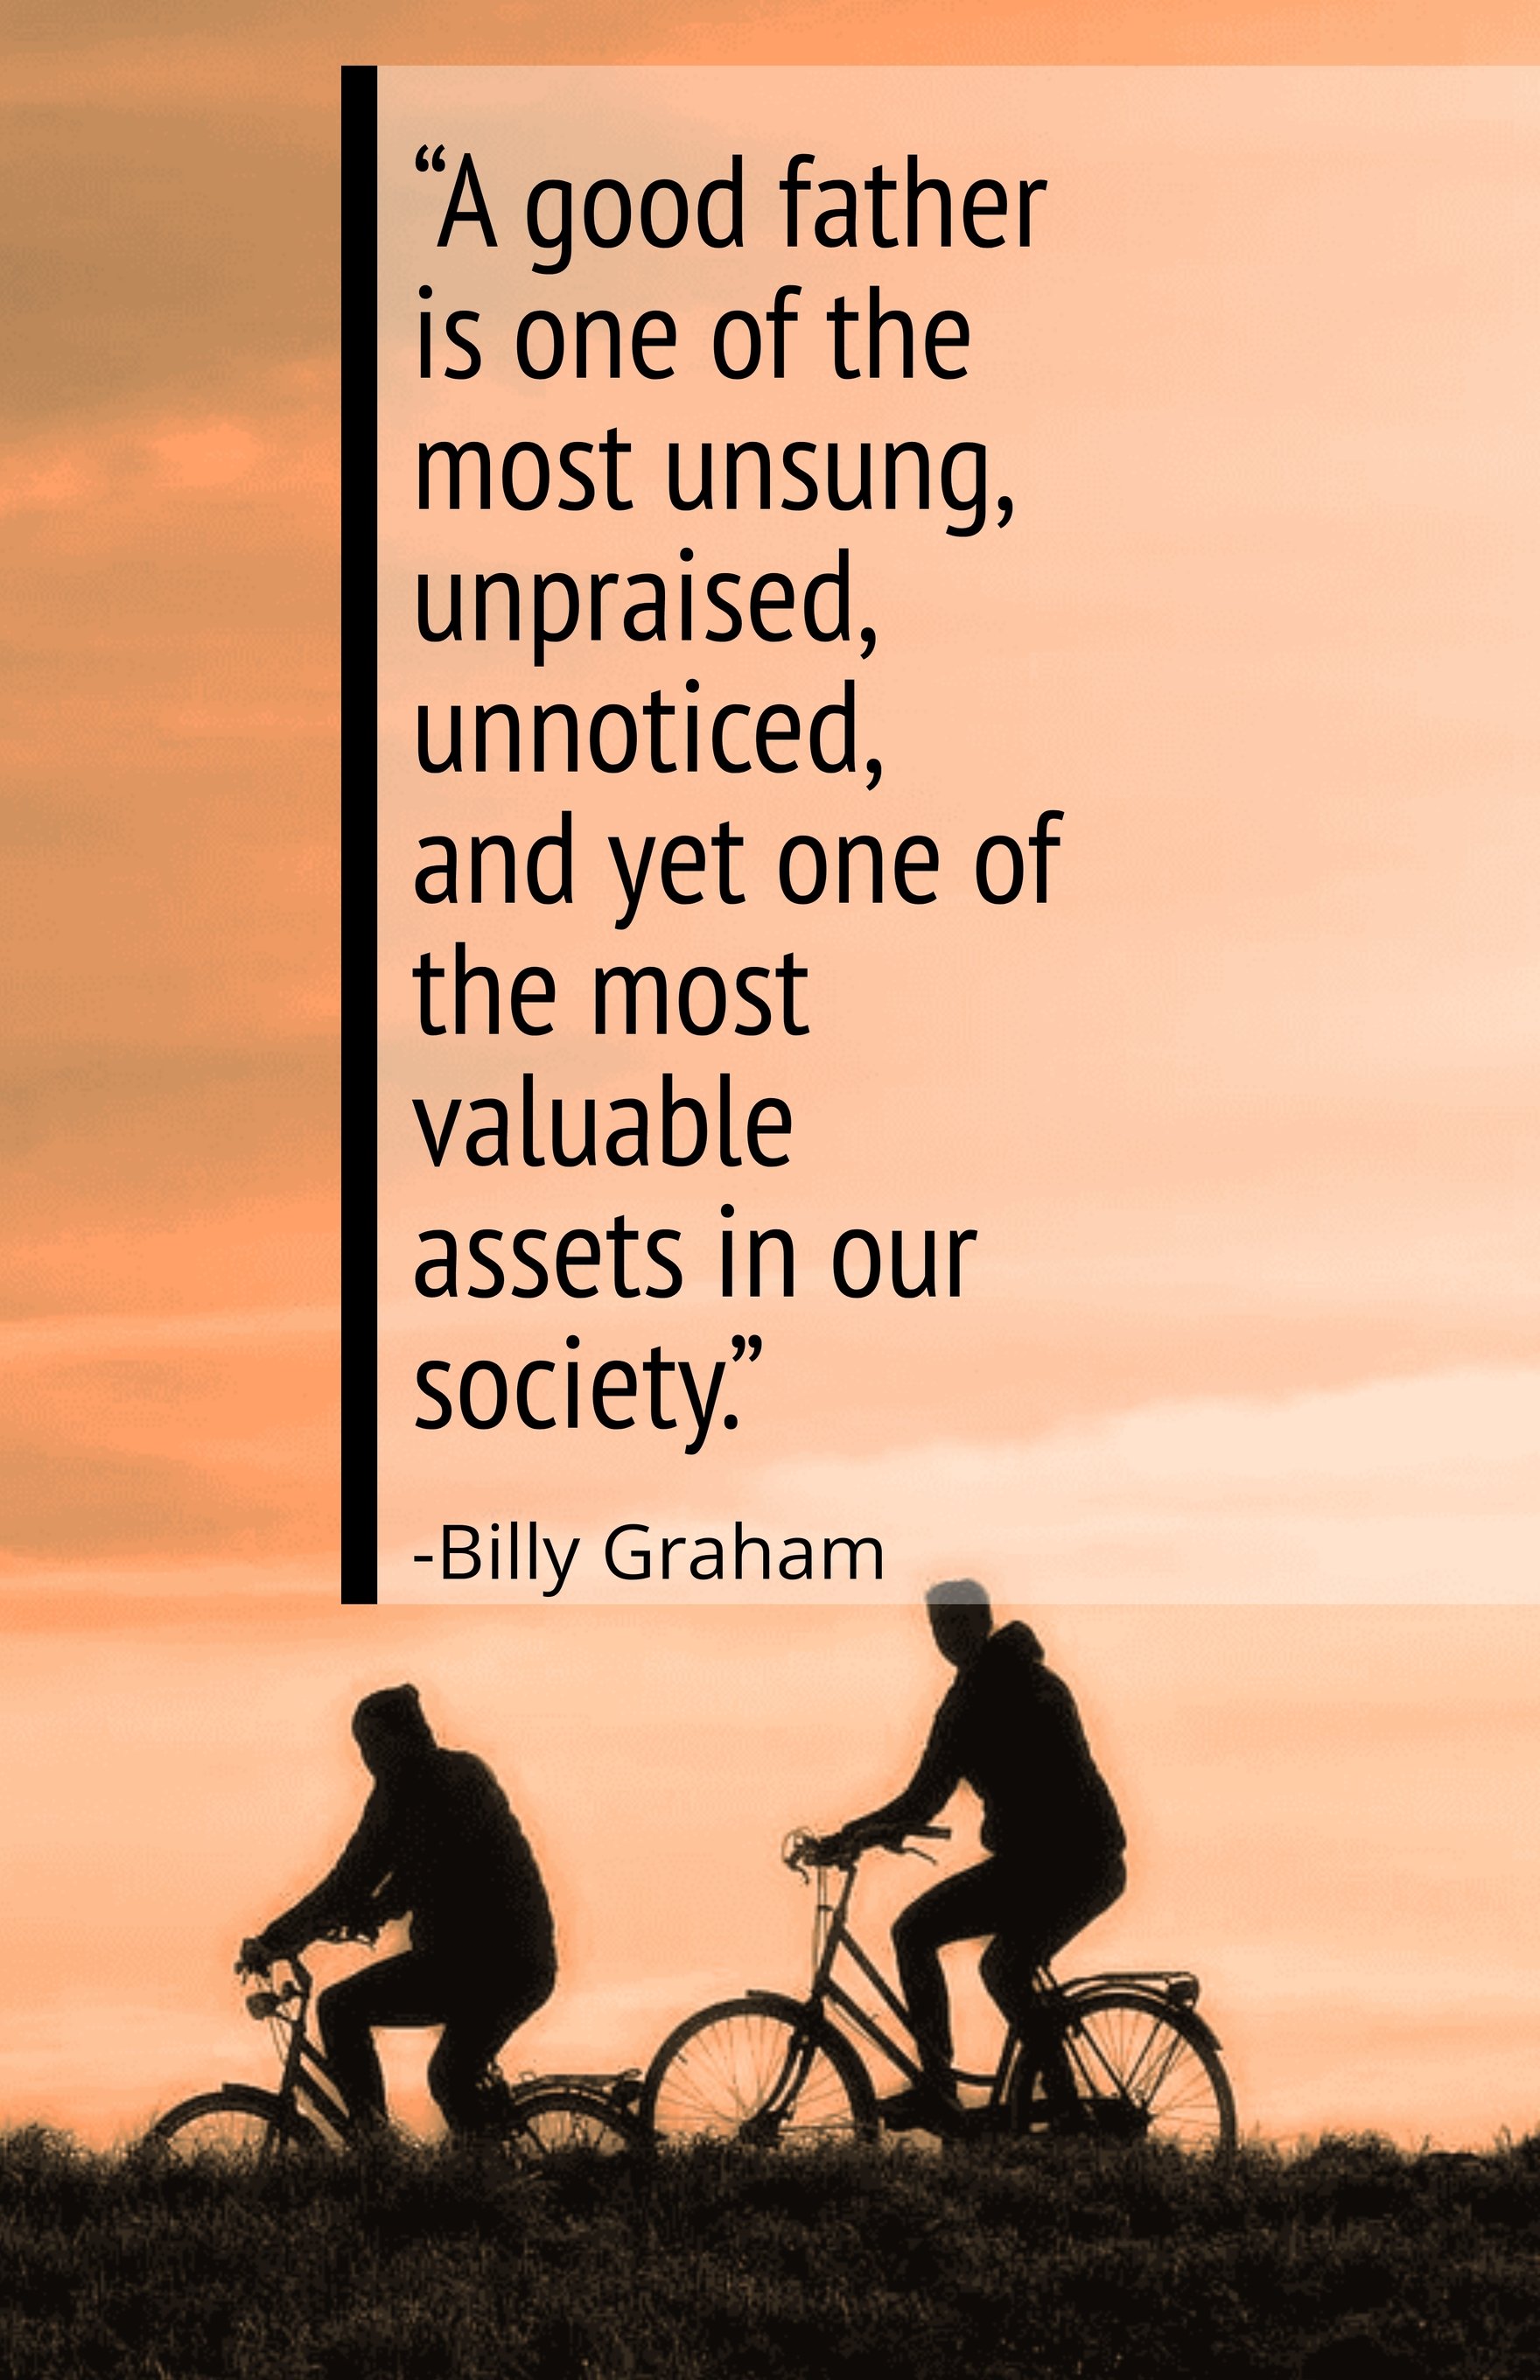 Billy Graham-“A good father is one of the most unsung, unpraised, unnoticed, and yet one of the most valuable assets in our society.”